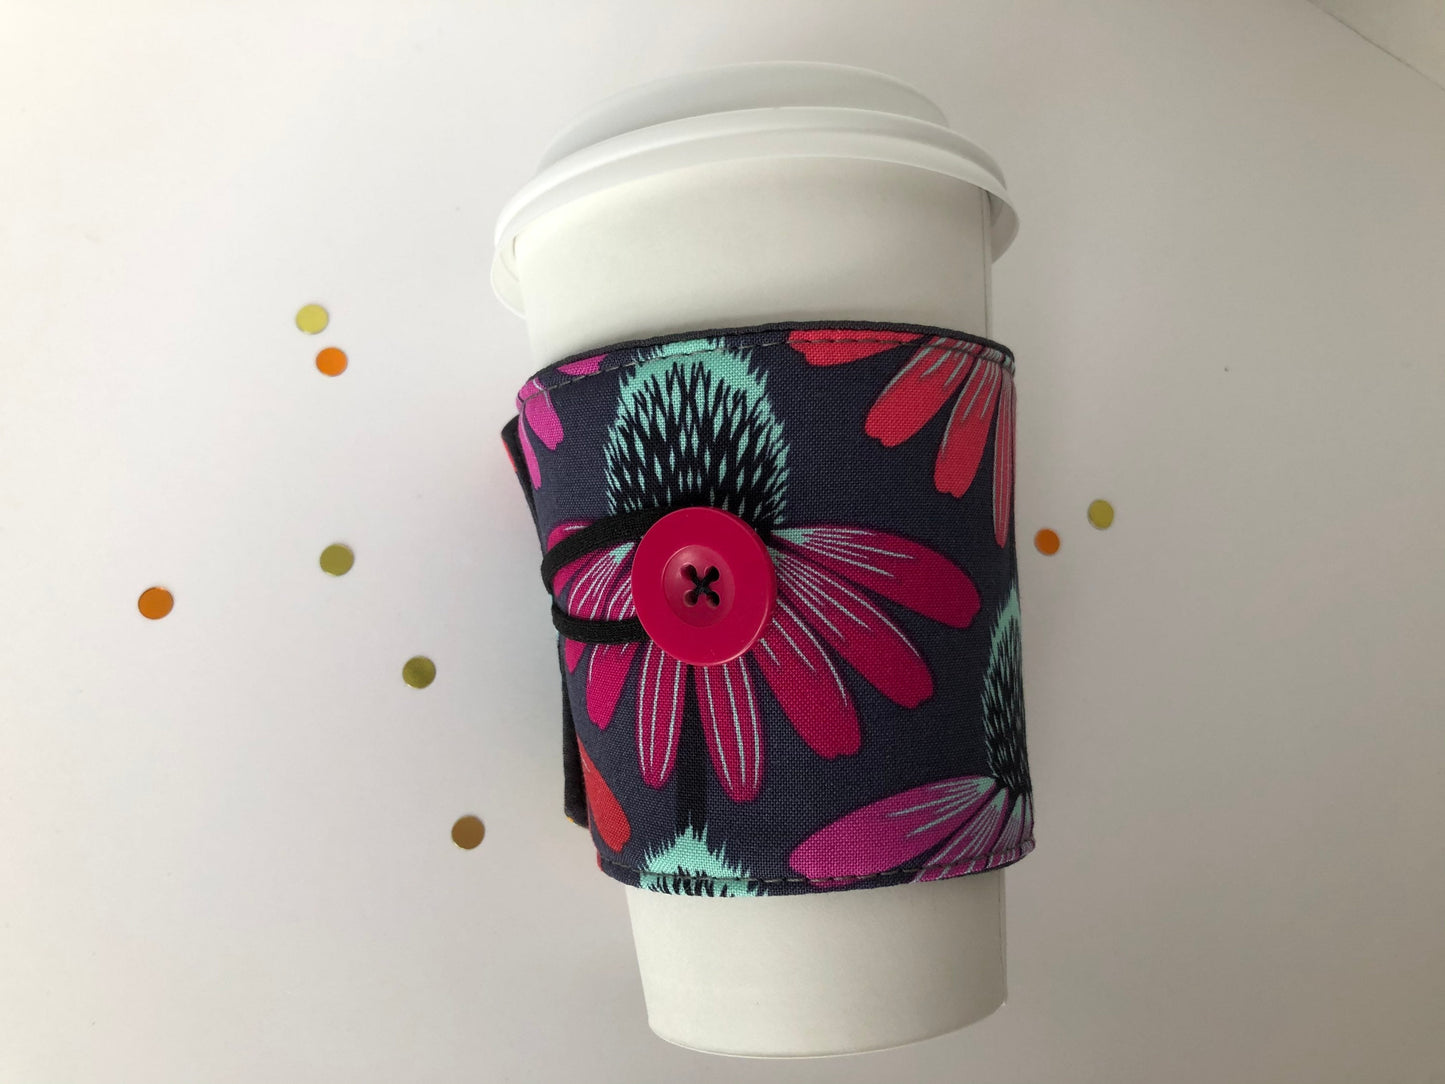 Echinacea Flowers Coffee Cup Cozy, fabric coffee sleeve, gift for her